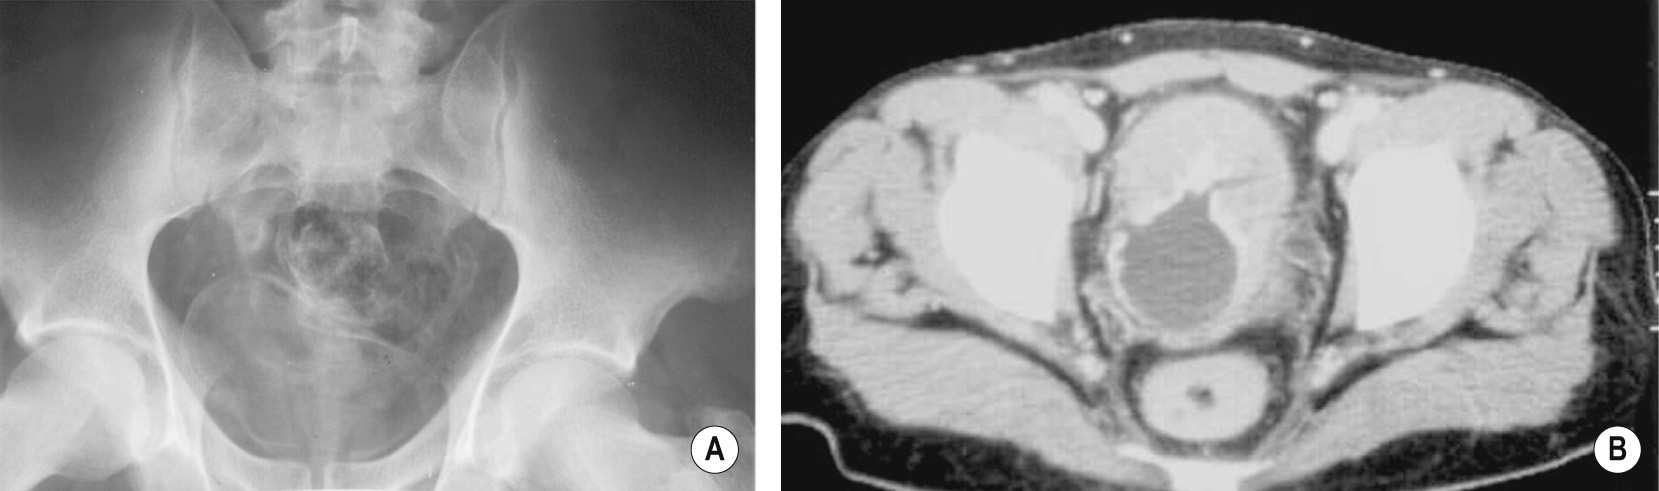 Schistosomiasis. Plain XR (A) showing linear calcification along the bladder wall and distal left ureter. CT (B) demonstrating bladder wall calcification and thickening – this may be gross and (as here) associated with rectal wall thickening. †